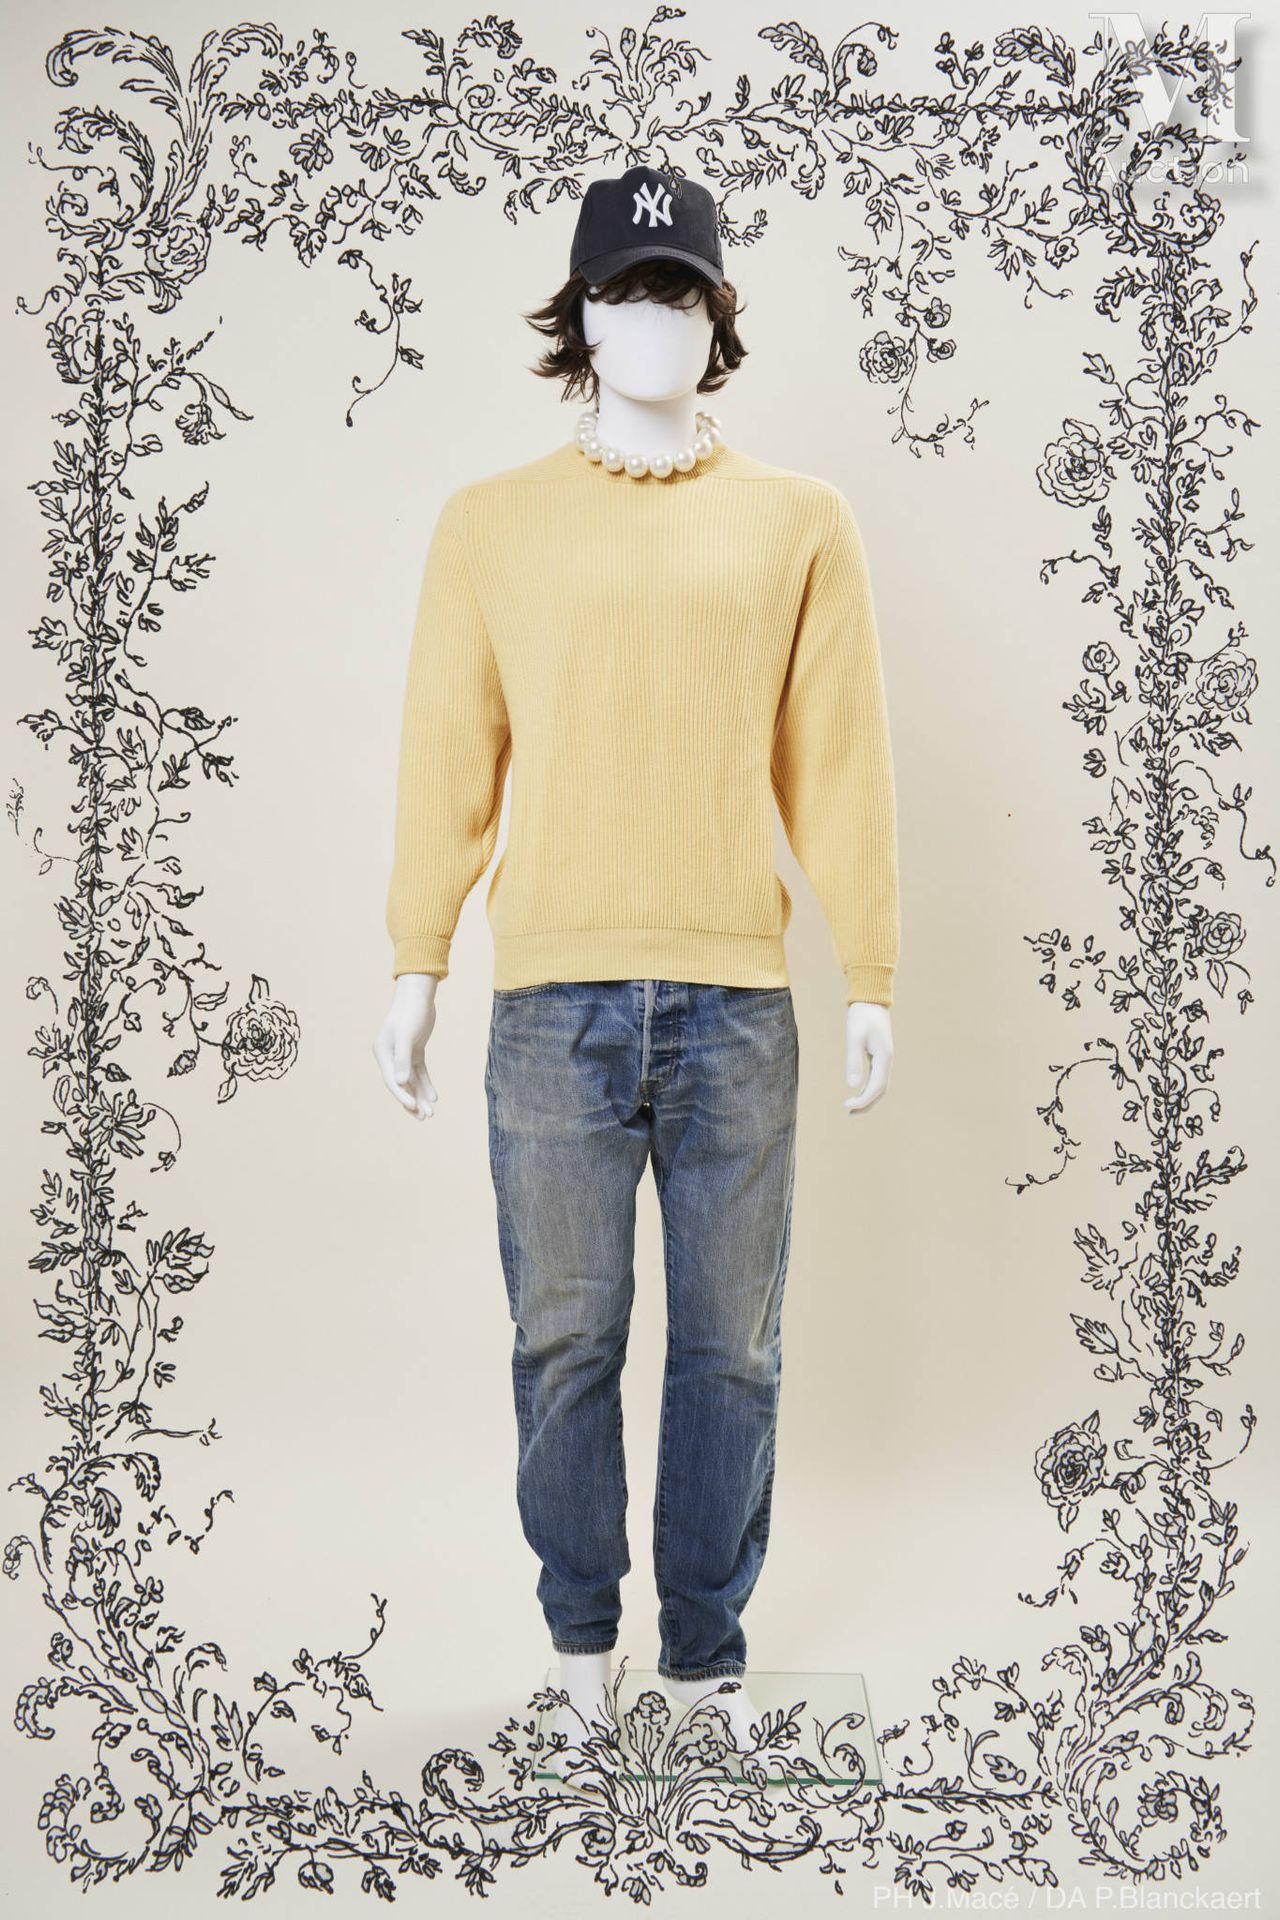 ANONYME Sweater
in sky blue ribbed cashmere knit 
S approx. M/L